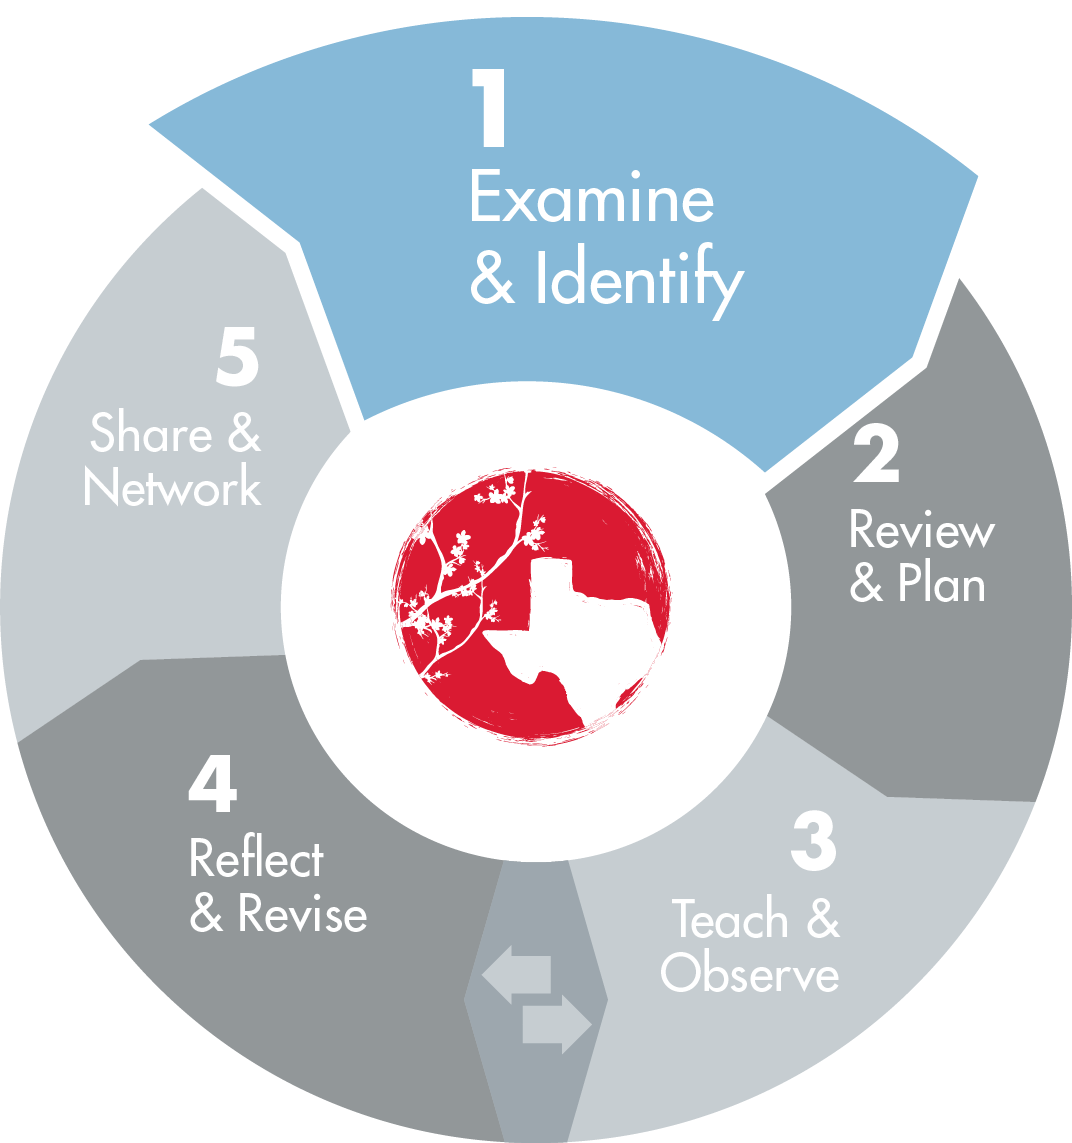 TEXAS LESSON STUDY  5 PHASES - 1. Examine & Identify, 2. Review & Plan, 3. Teach & Observe, 4. Reflect & Revise and 5. Share & Network,  where phase 1 is visually selected